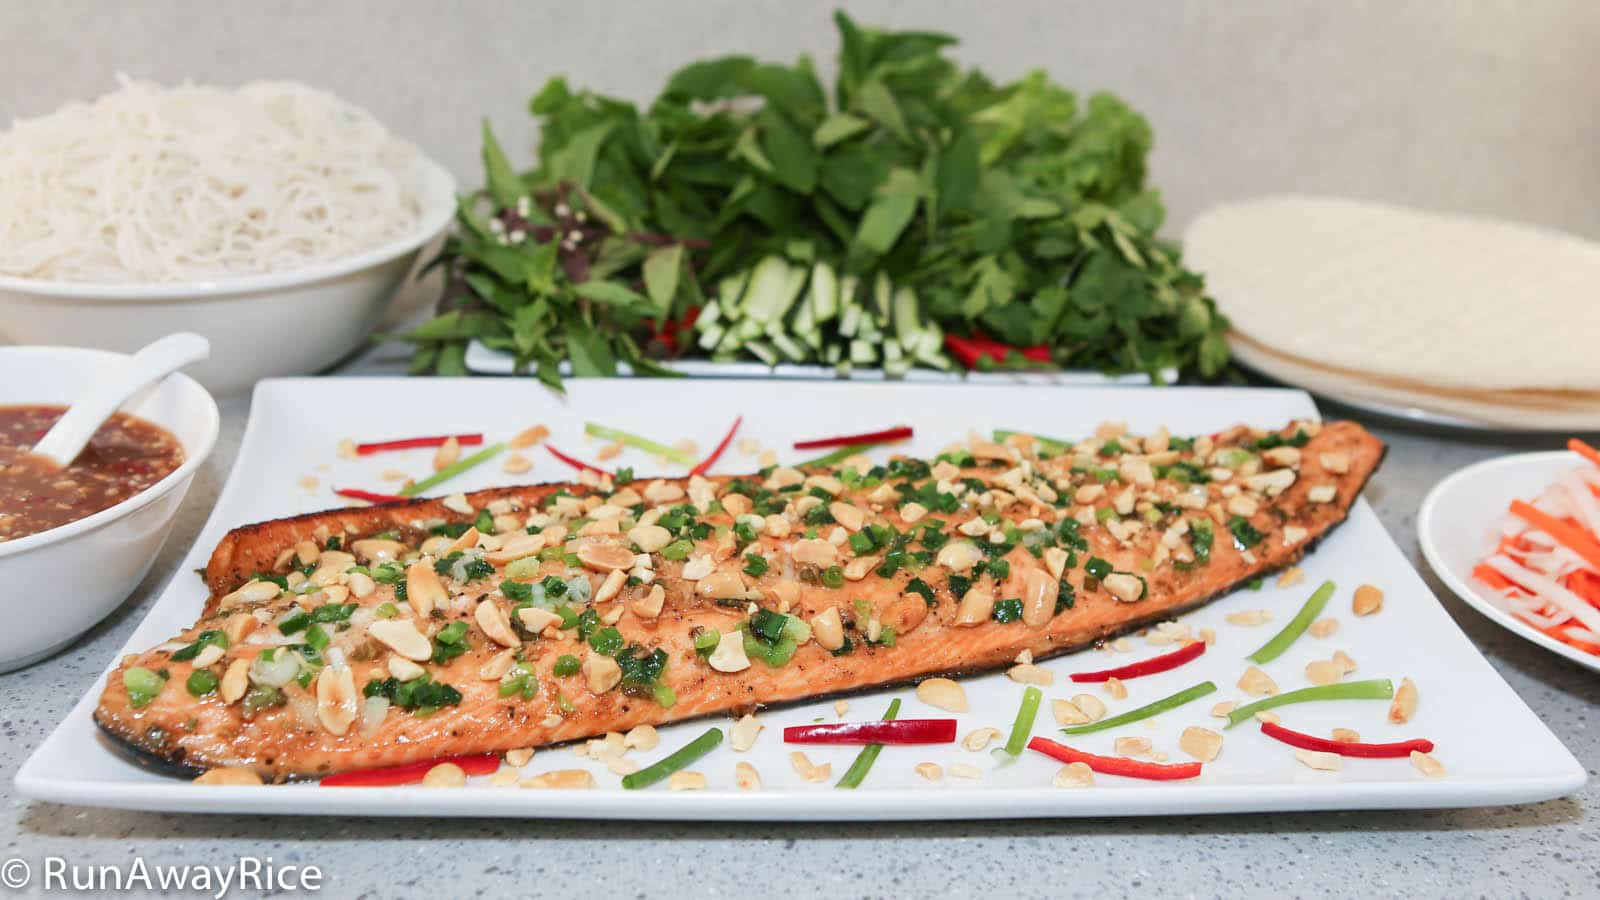 Asian-Style Baked Salmon (Cá Hồi Nướng) - Foolproof way to bake delicious salmon. | recipe from runawayrice.com